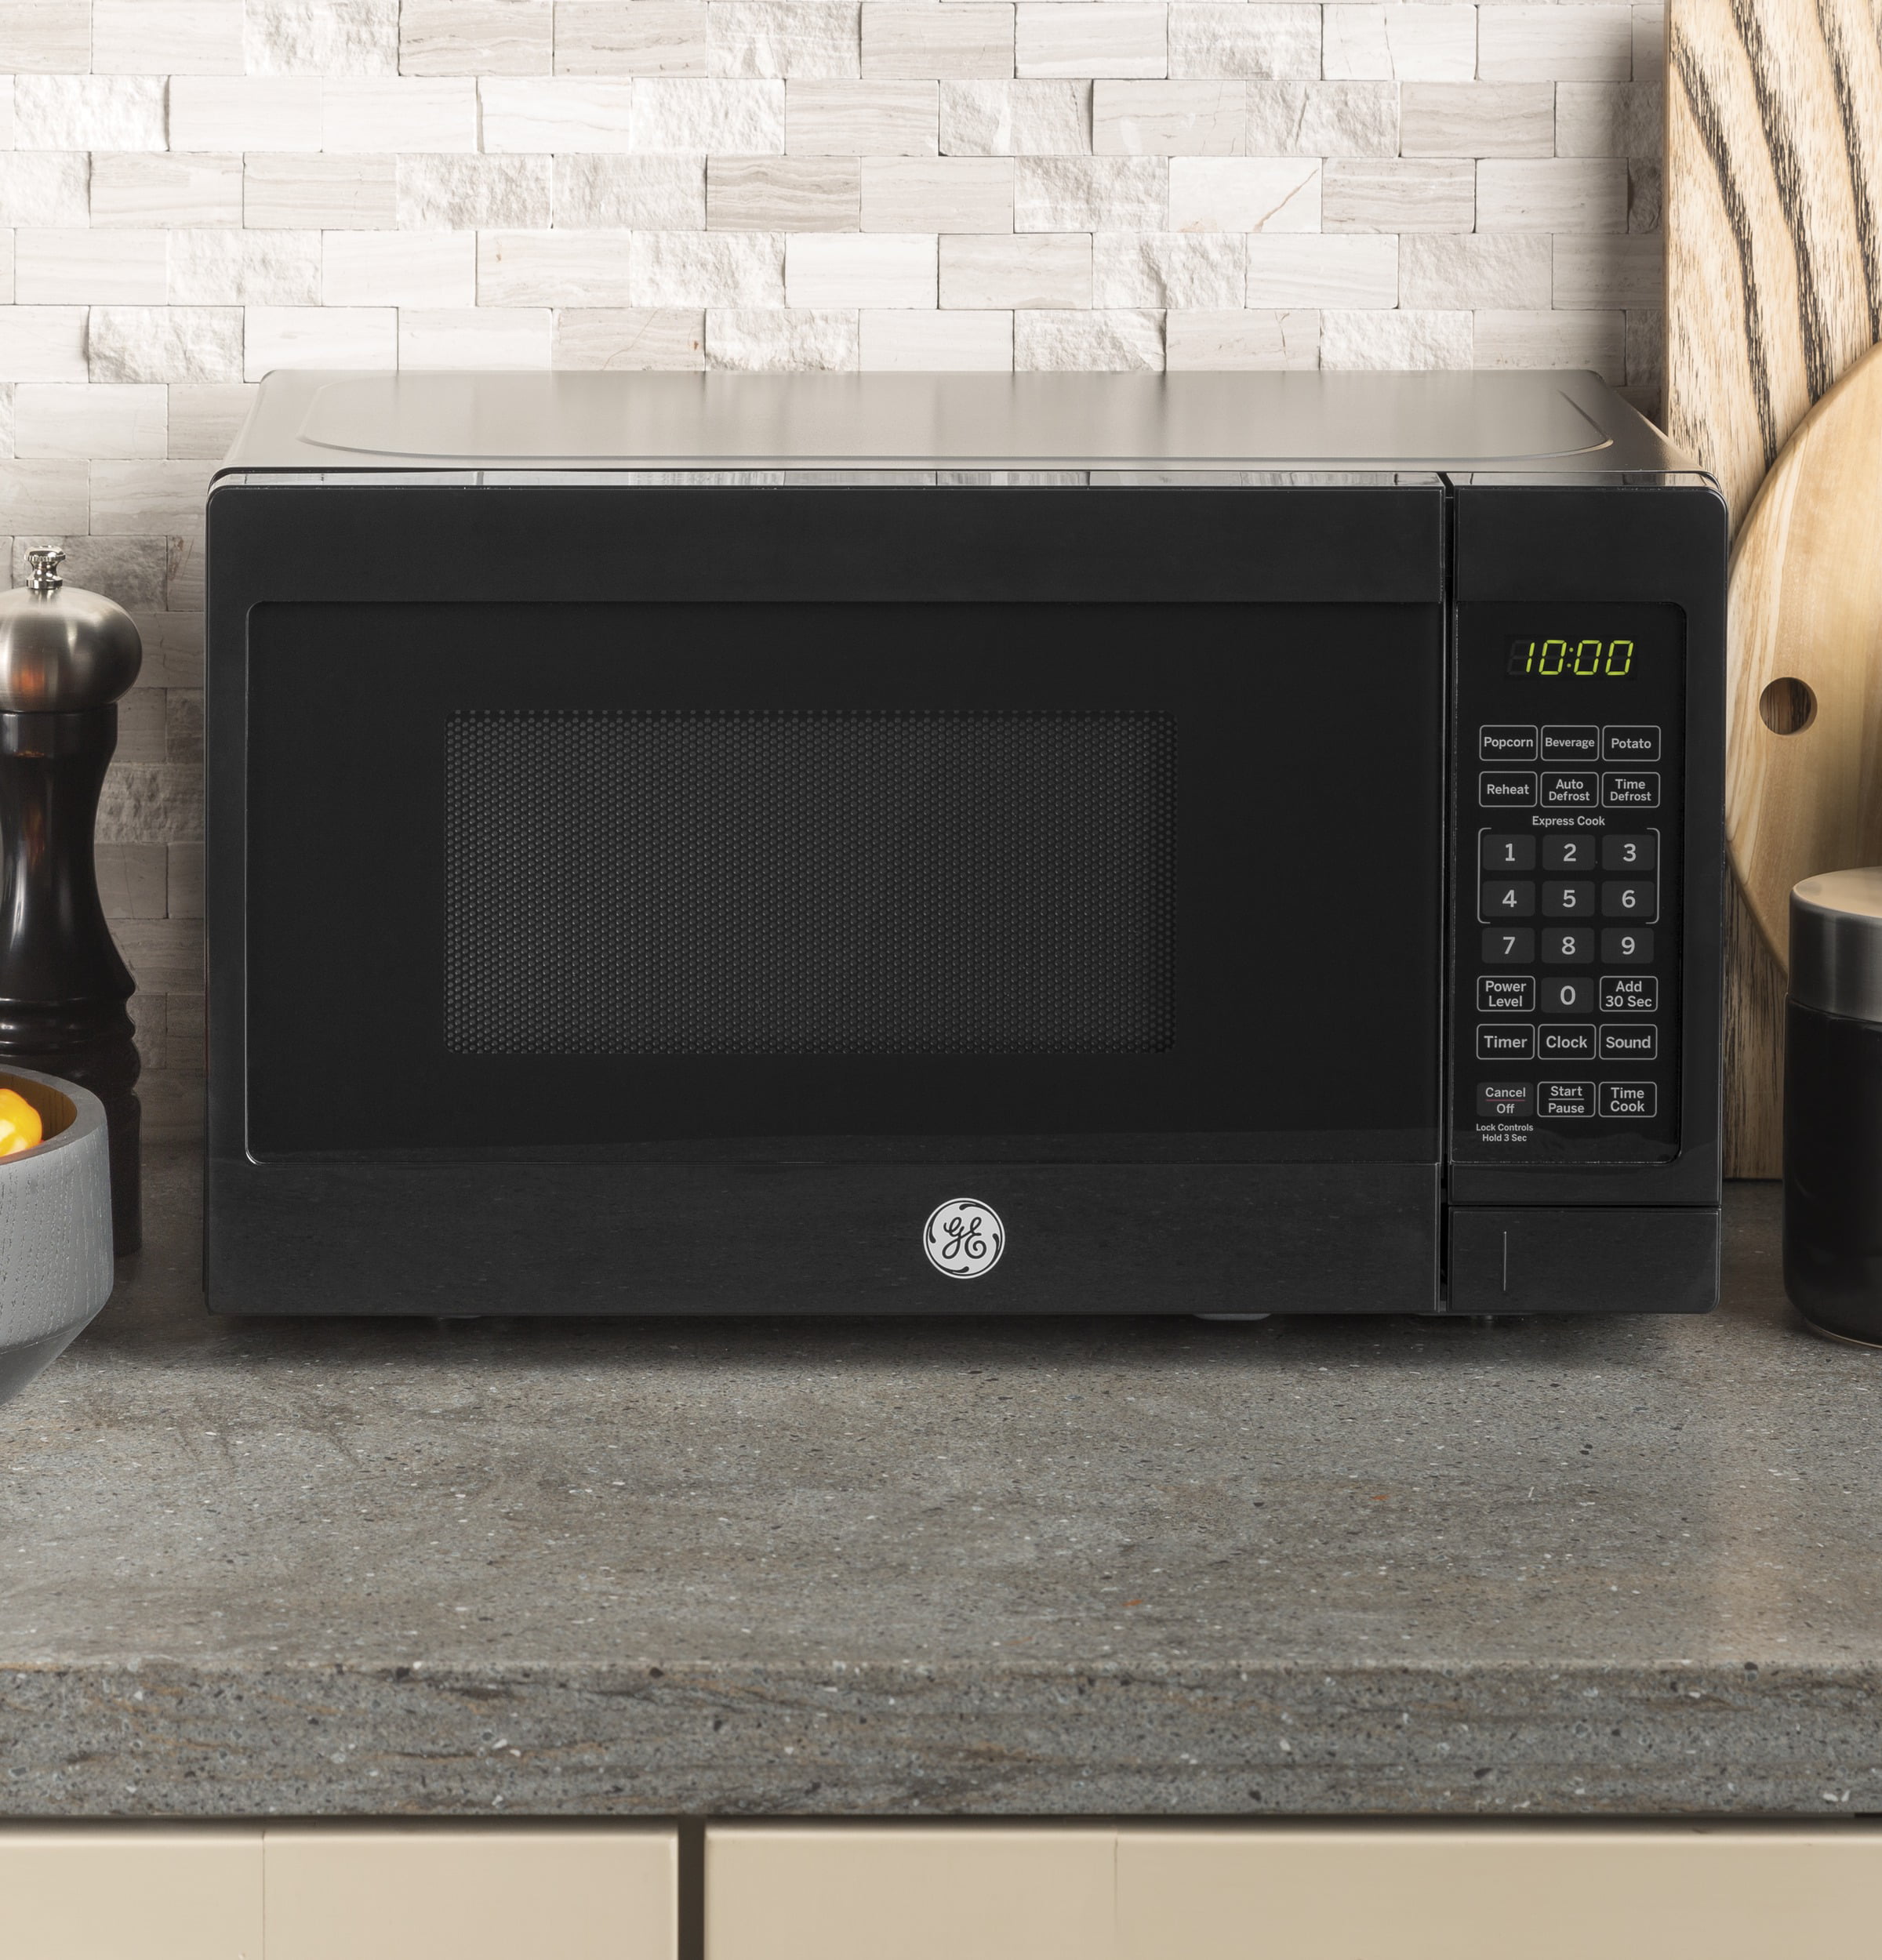 GE JES1072DMWW 0.7 cu. ft. Countertop Microwave Oven with